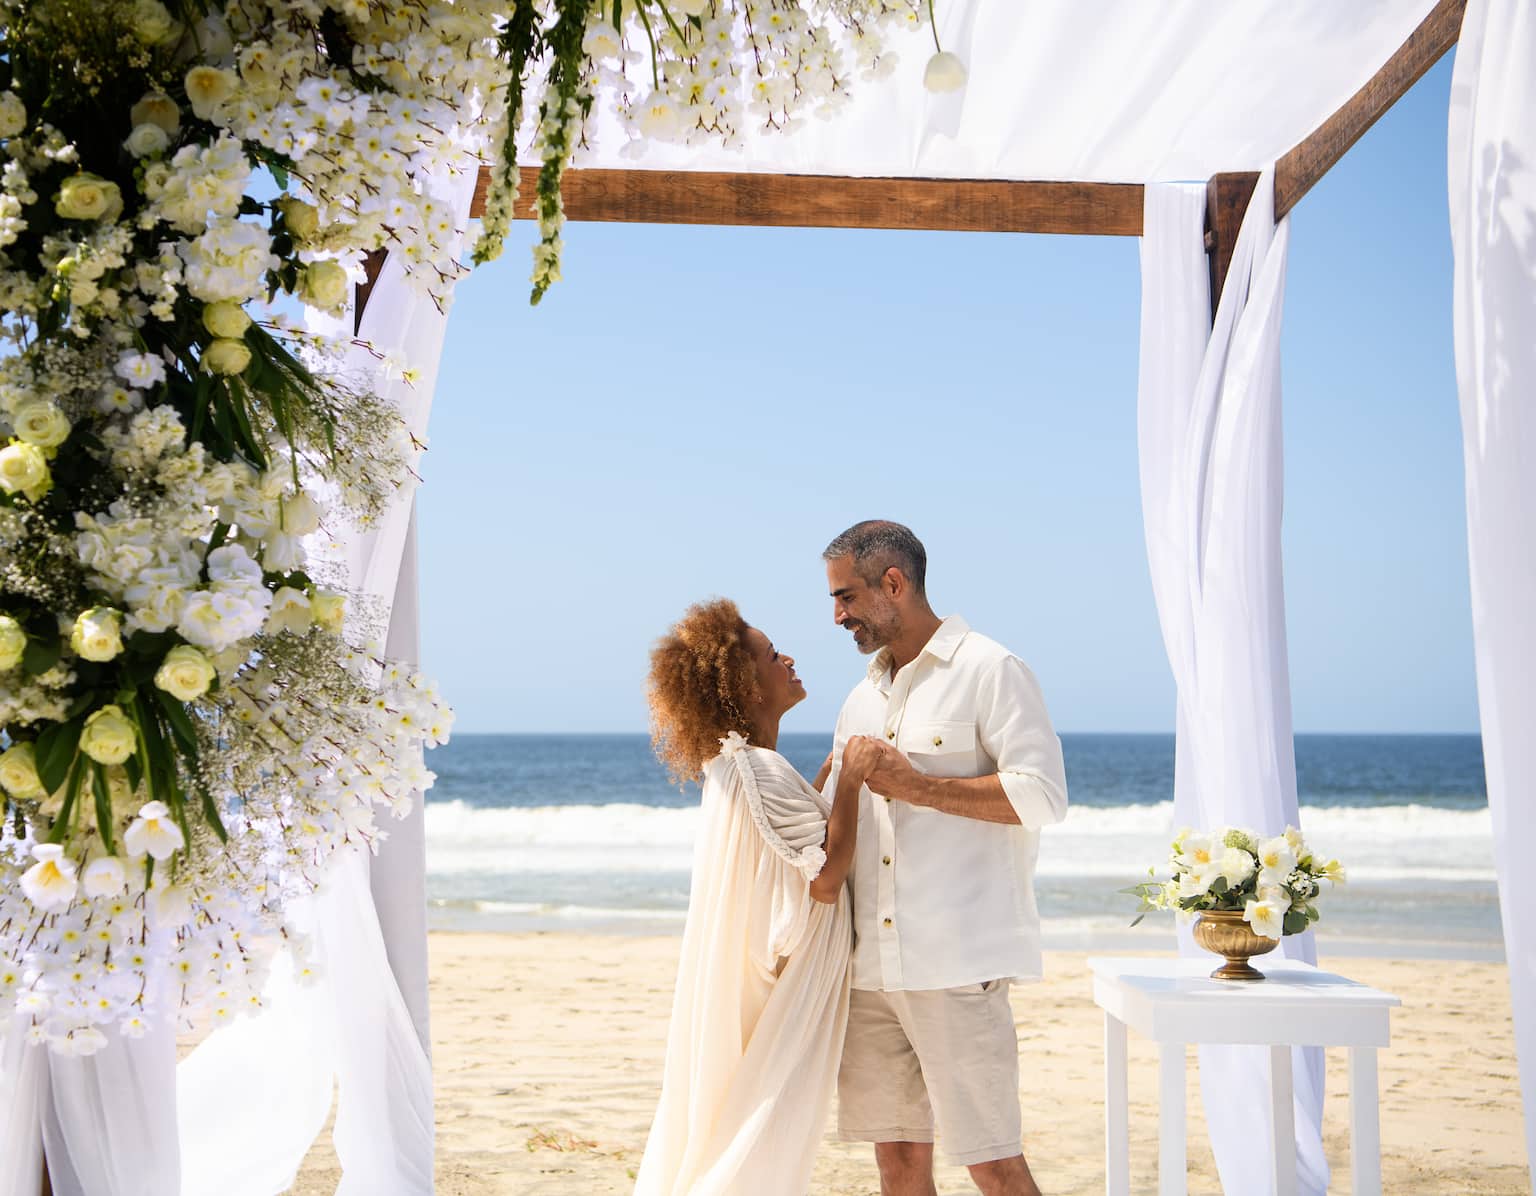 A couple getting married under a wooden trellis on the beach.